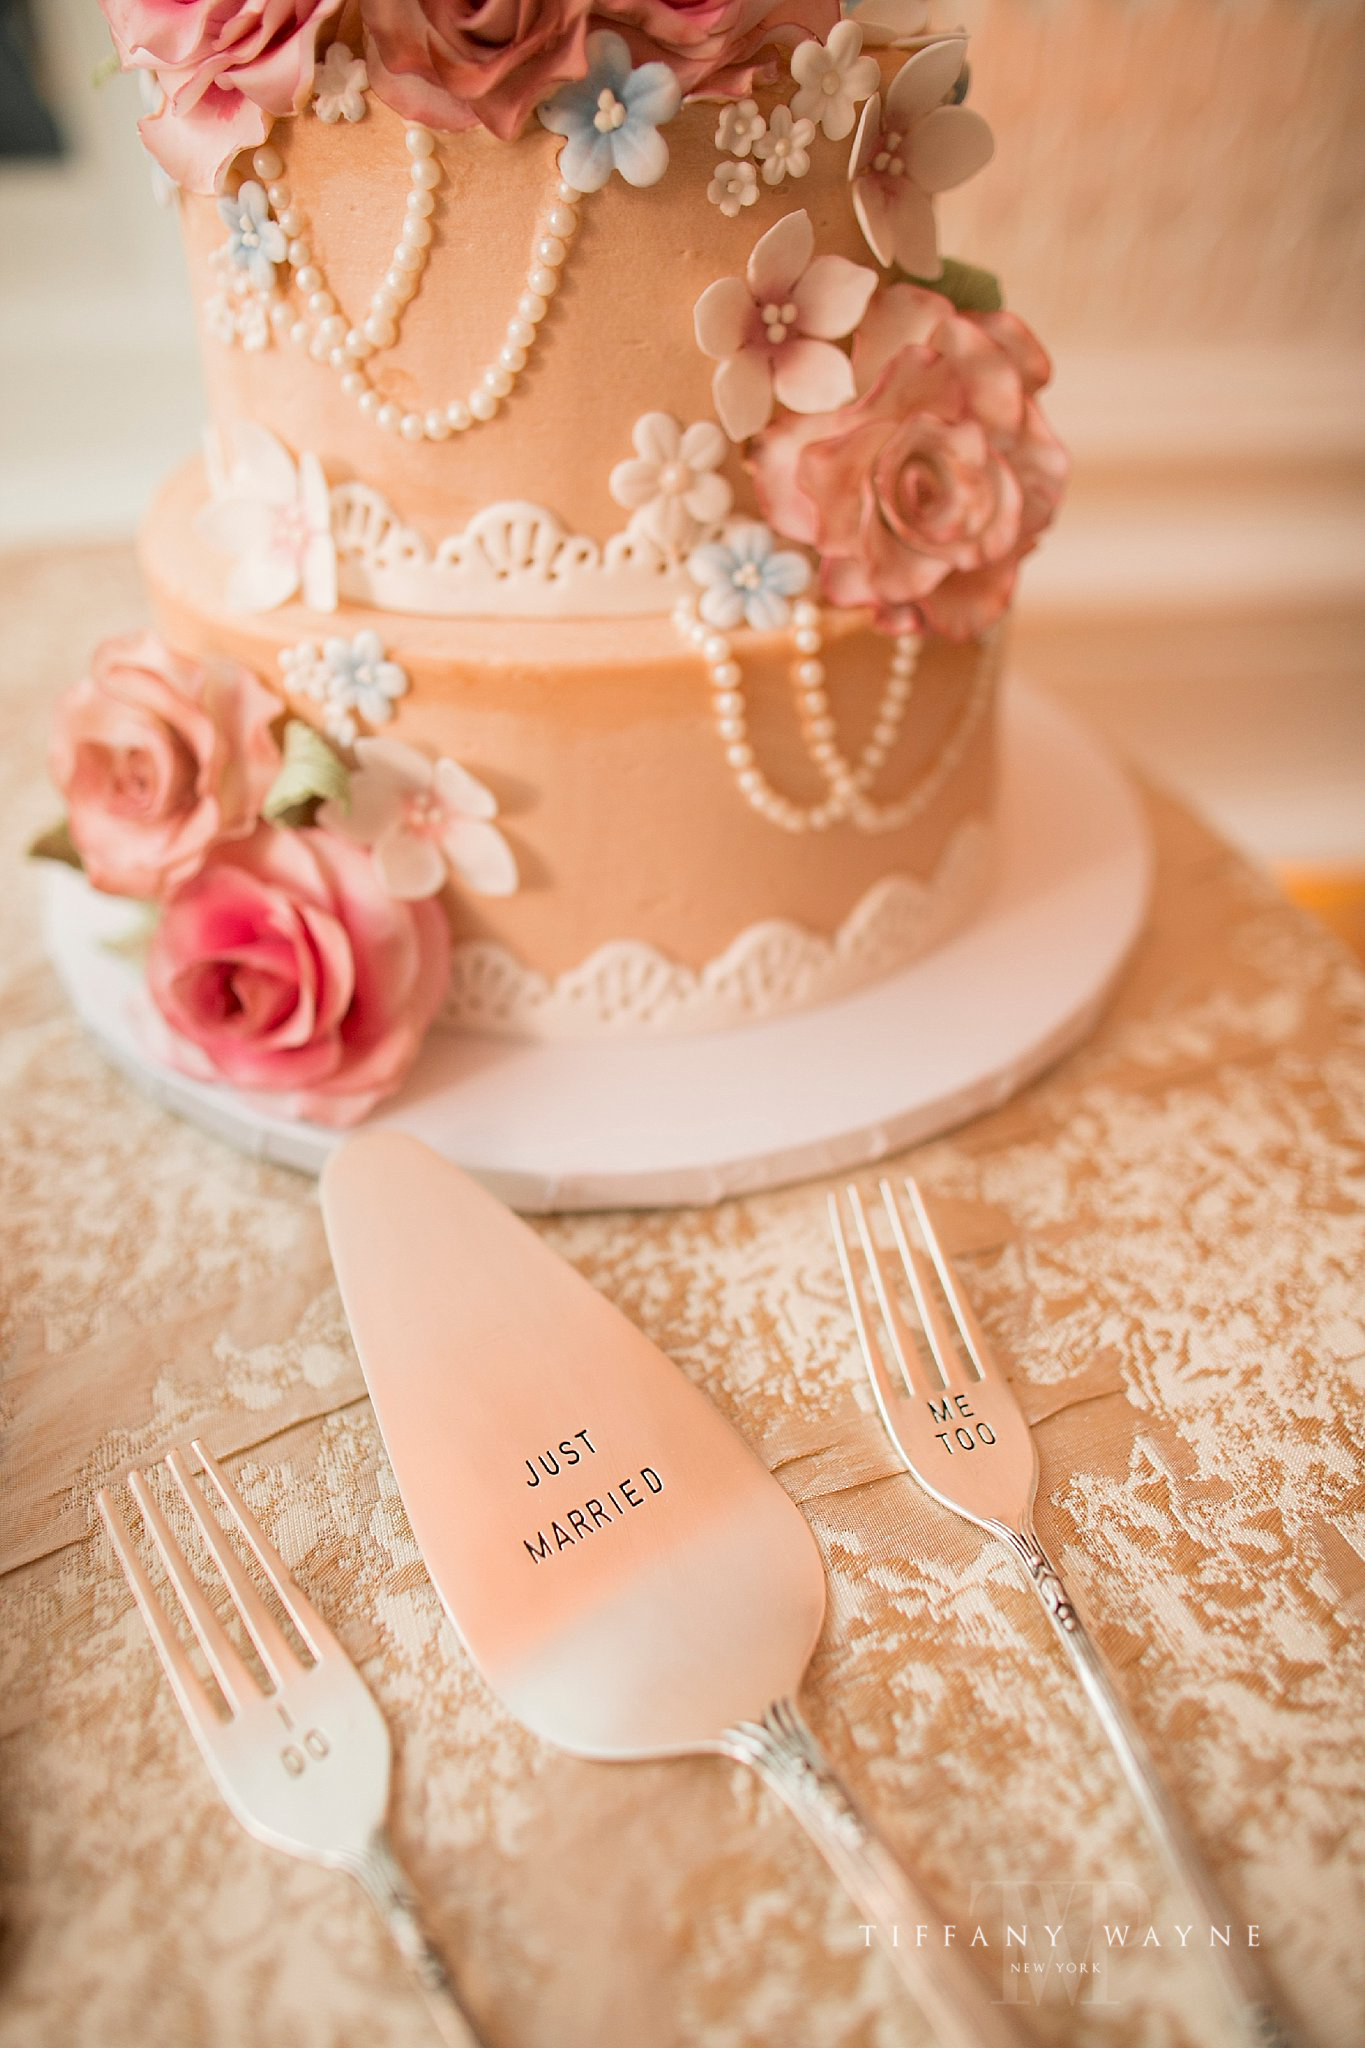 Blush and peach tiered wedding cake photographed by Tiffany Wayne Photography